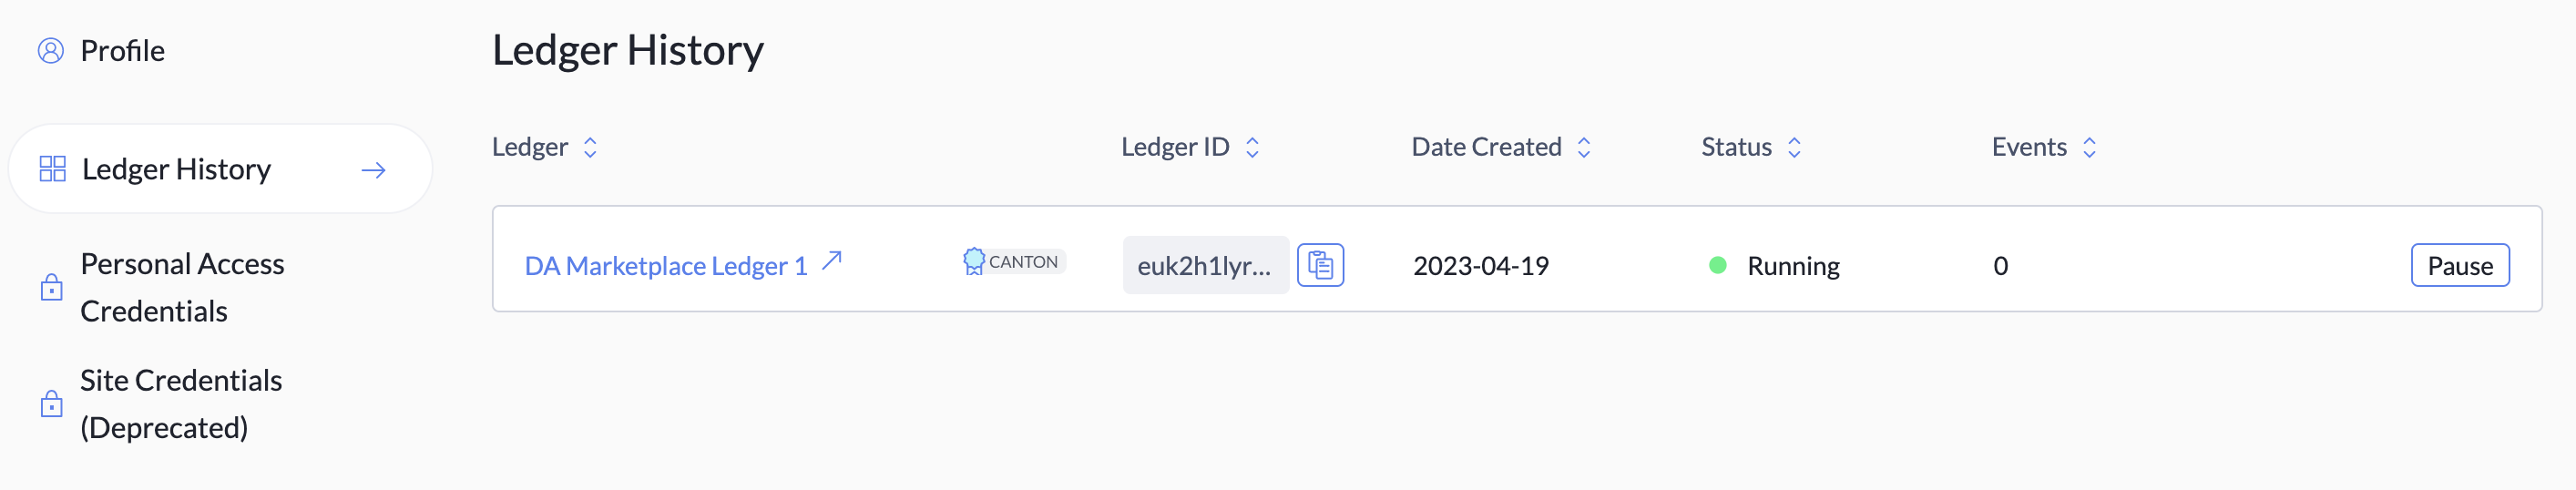 The Ledger History tab with information for one ledger